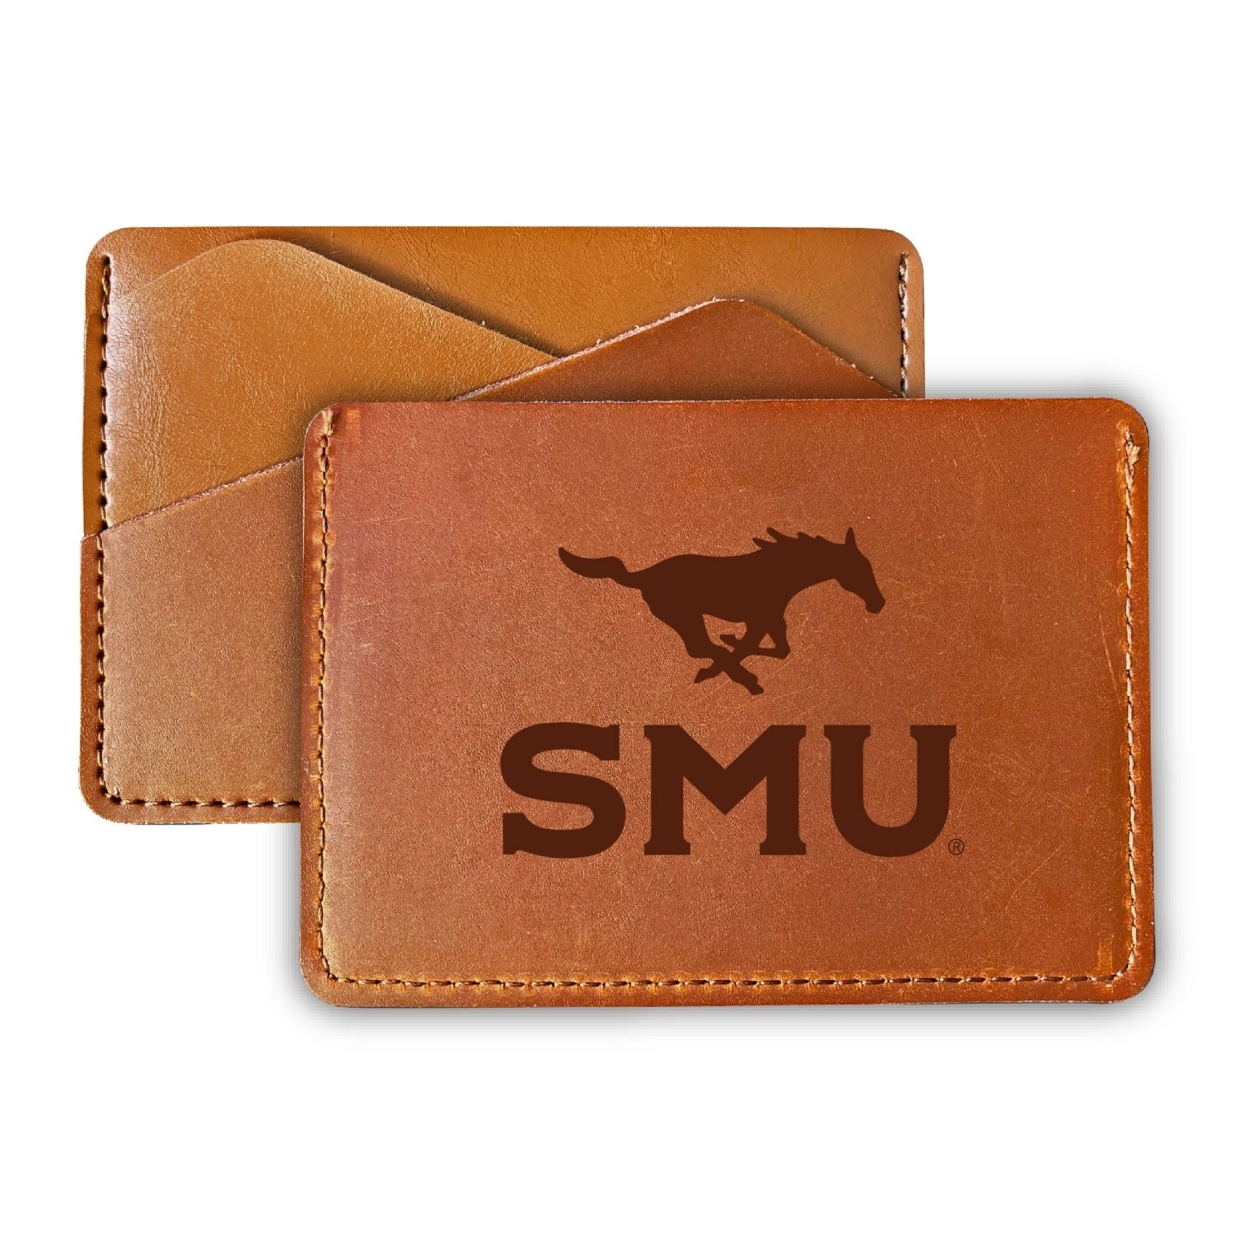 Southern Methodist University College Leather Card Holder Wallet